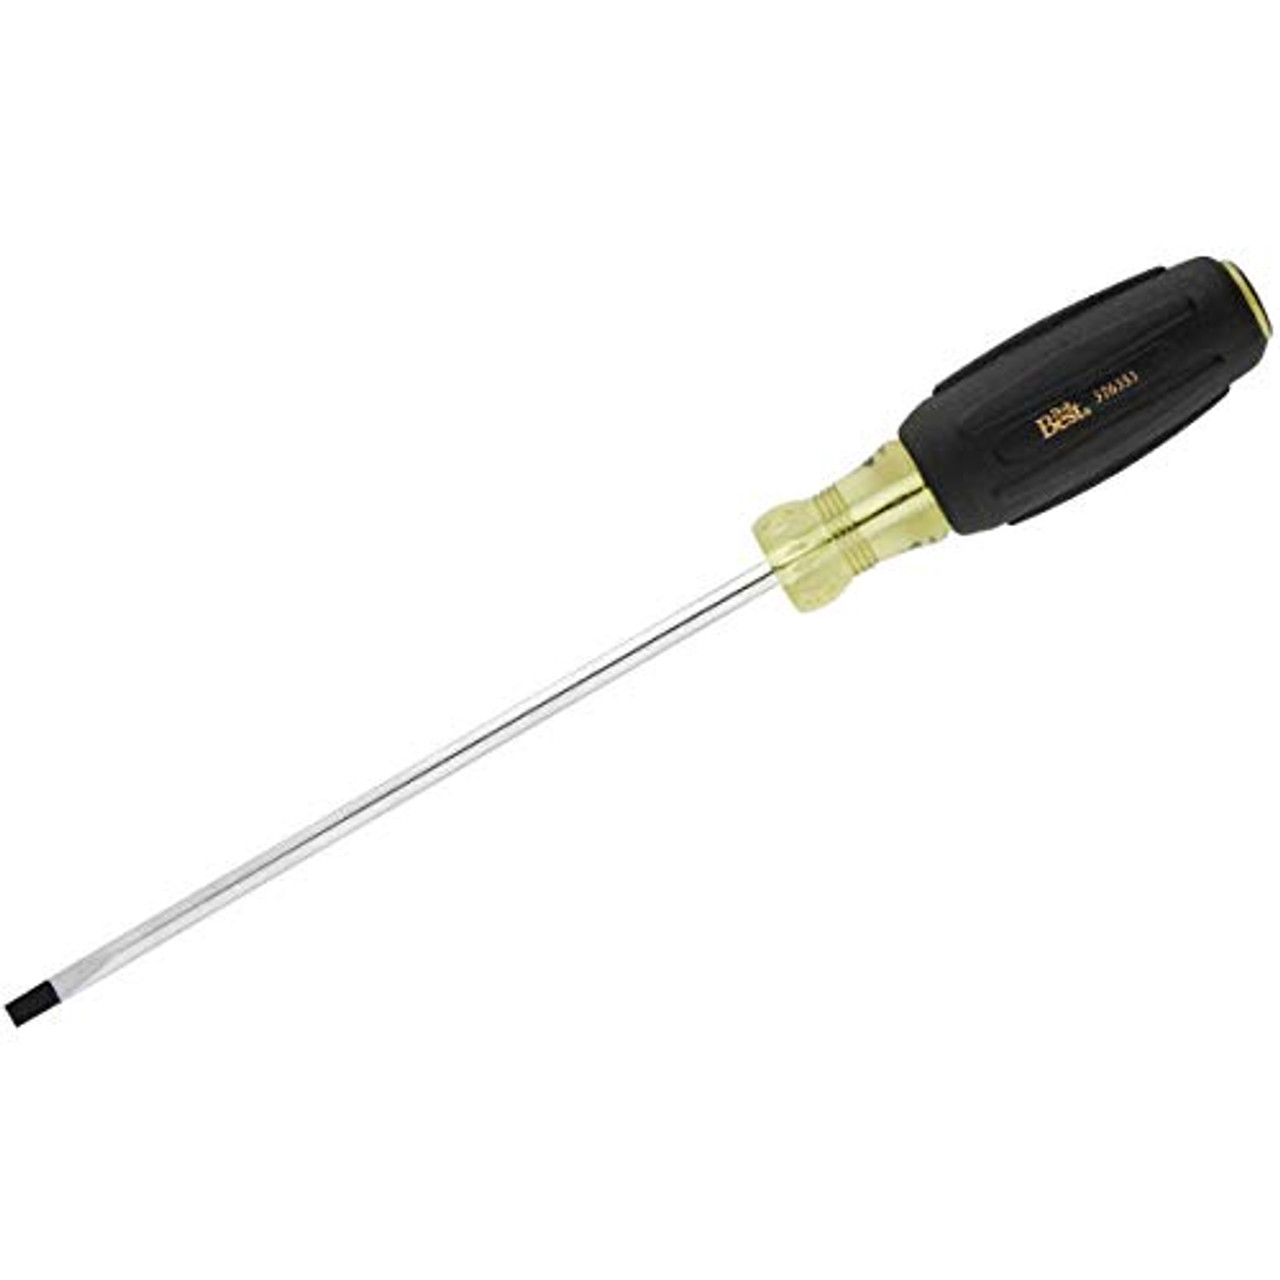 Do it Best 376353 Professional Cushion-Grip Slotted Screwdriver, 3/16" x 6"